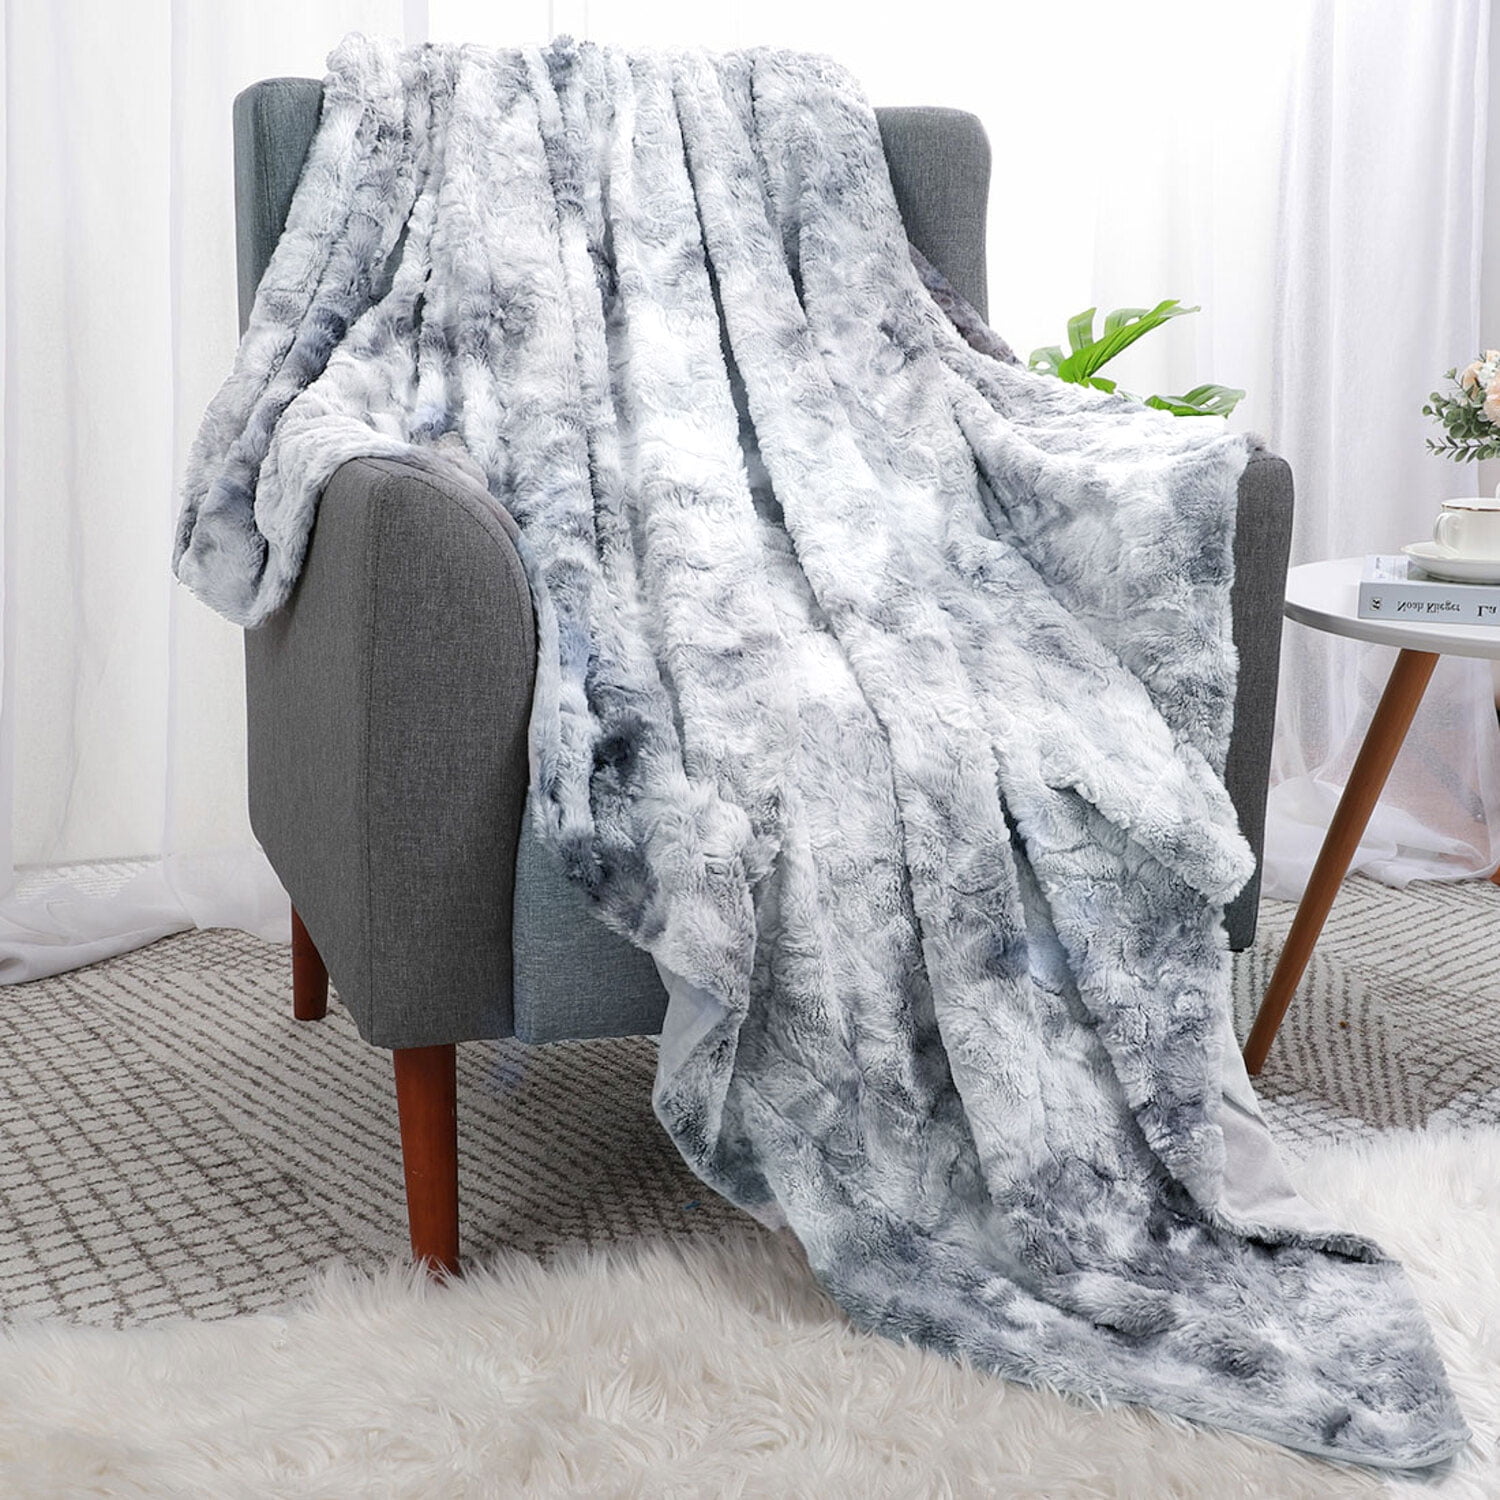 Details about   Faux Fur Blanket Full Size Throw Large 58 x 60 Luxury Artificial Soft Cozy Warm 